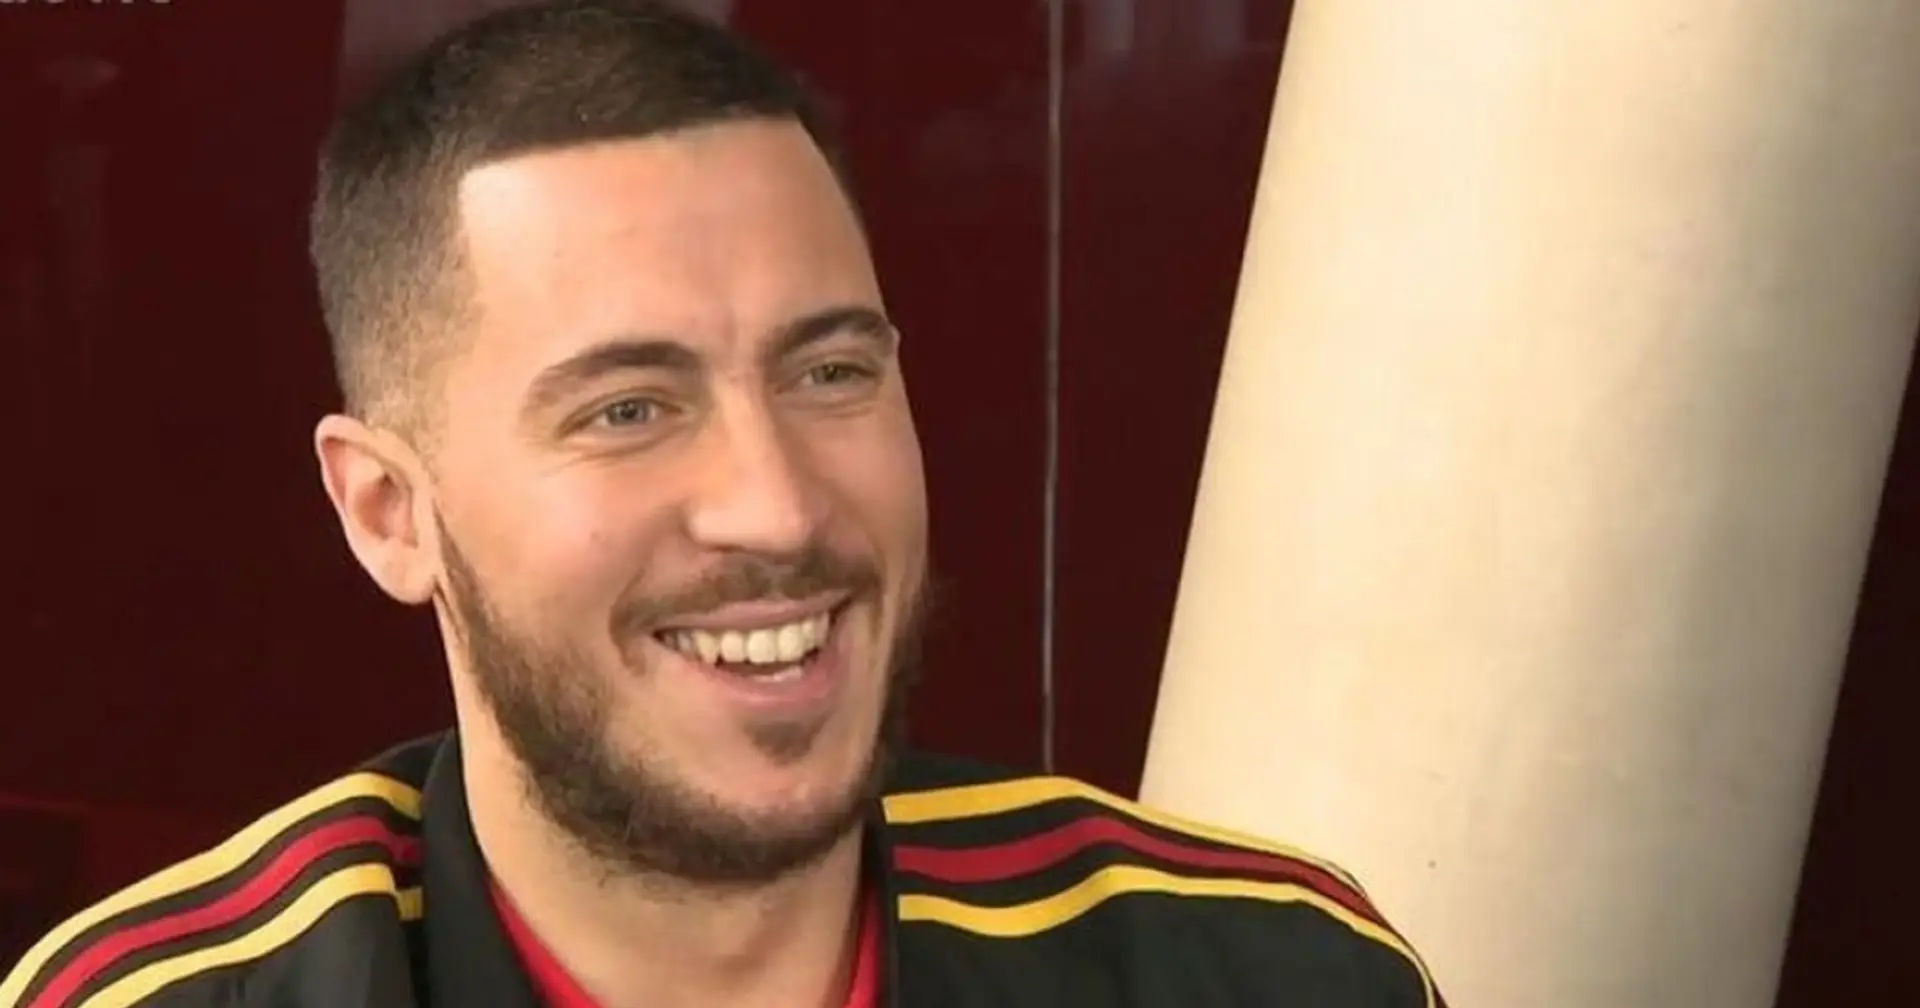 'You have to know when to stop': Hazard announces retirement from football at 32